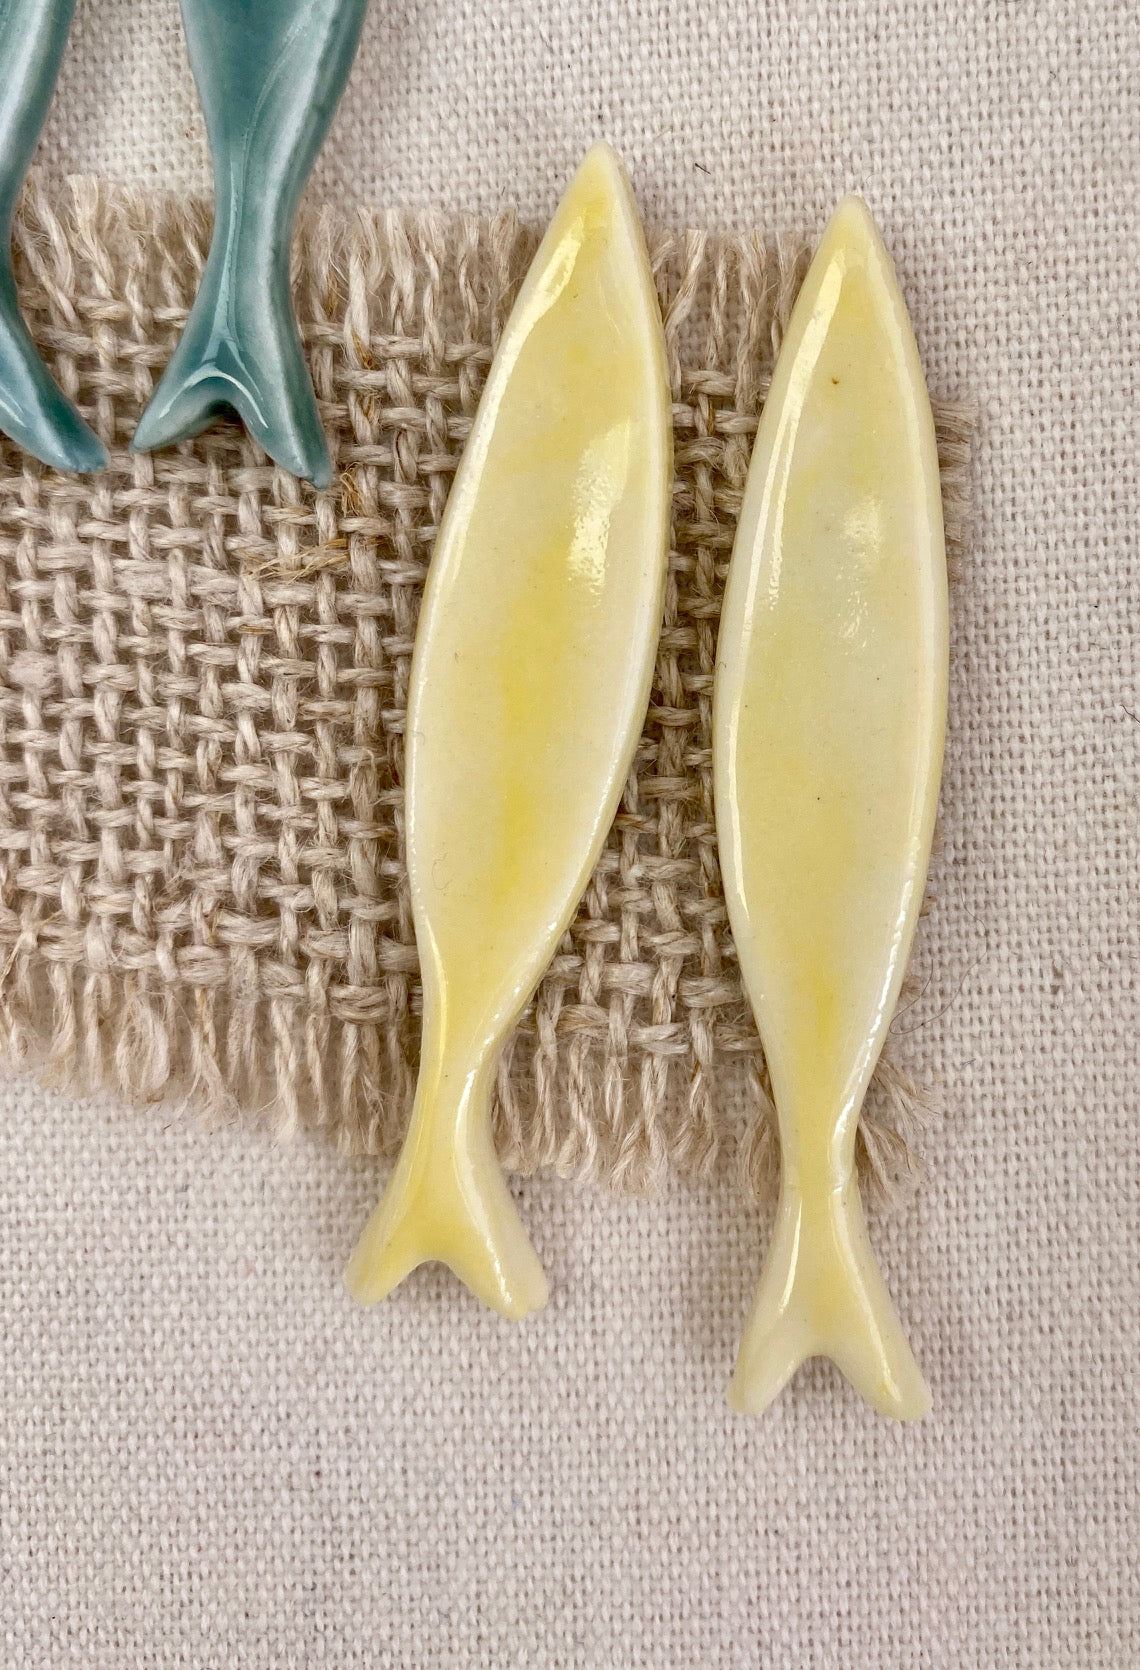 Coral, Sea Green, or Yellow Fish Earrings. Porcelain